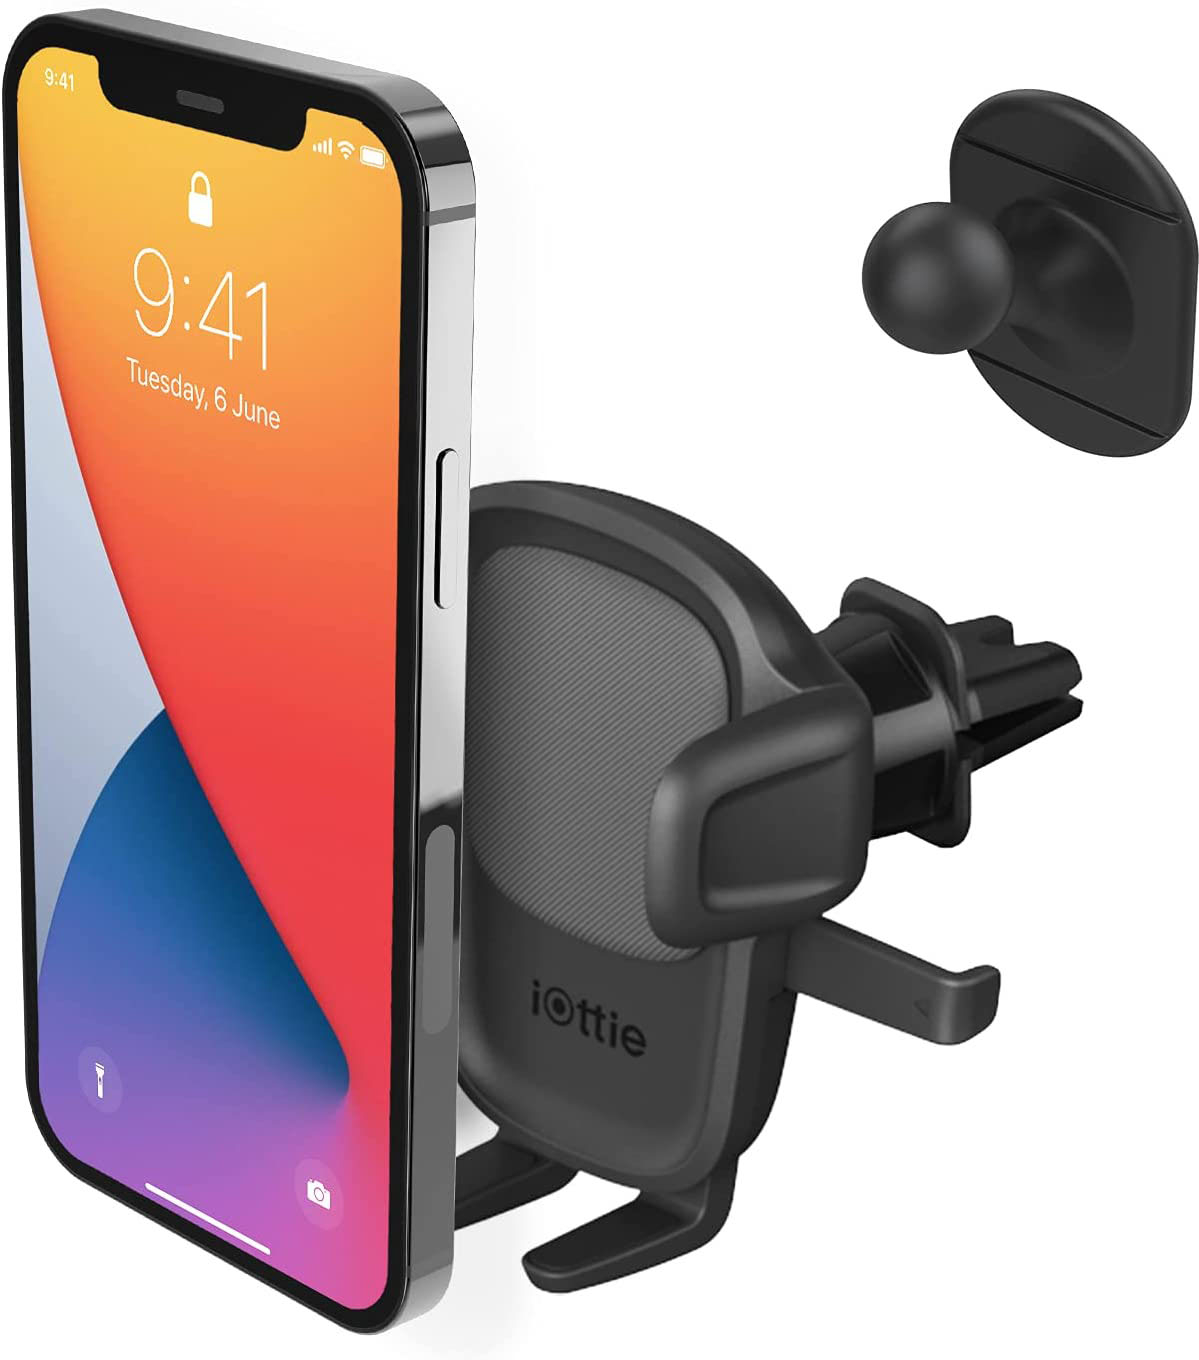 Iottie Smartphone Car Mount, Air Vent and Flush, 2 in 1